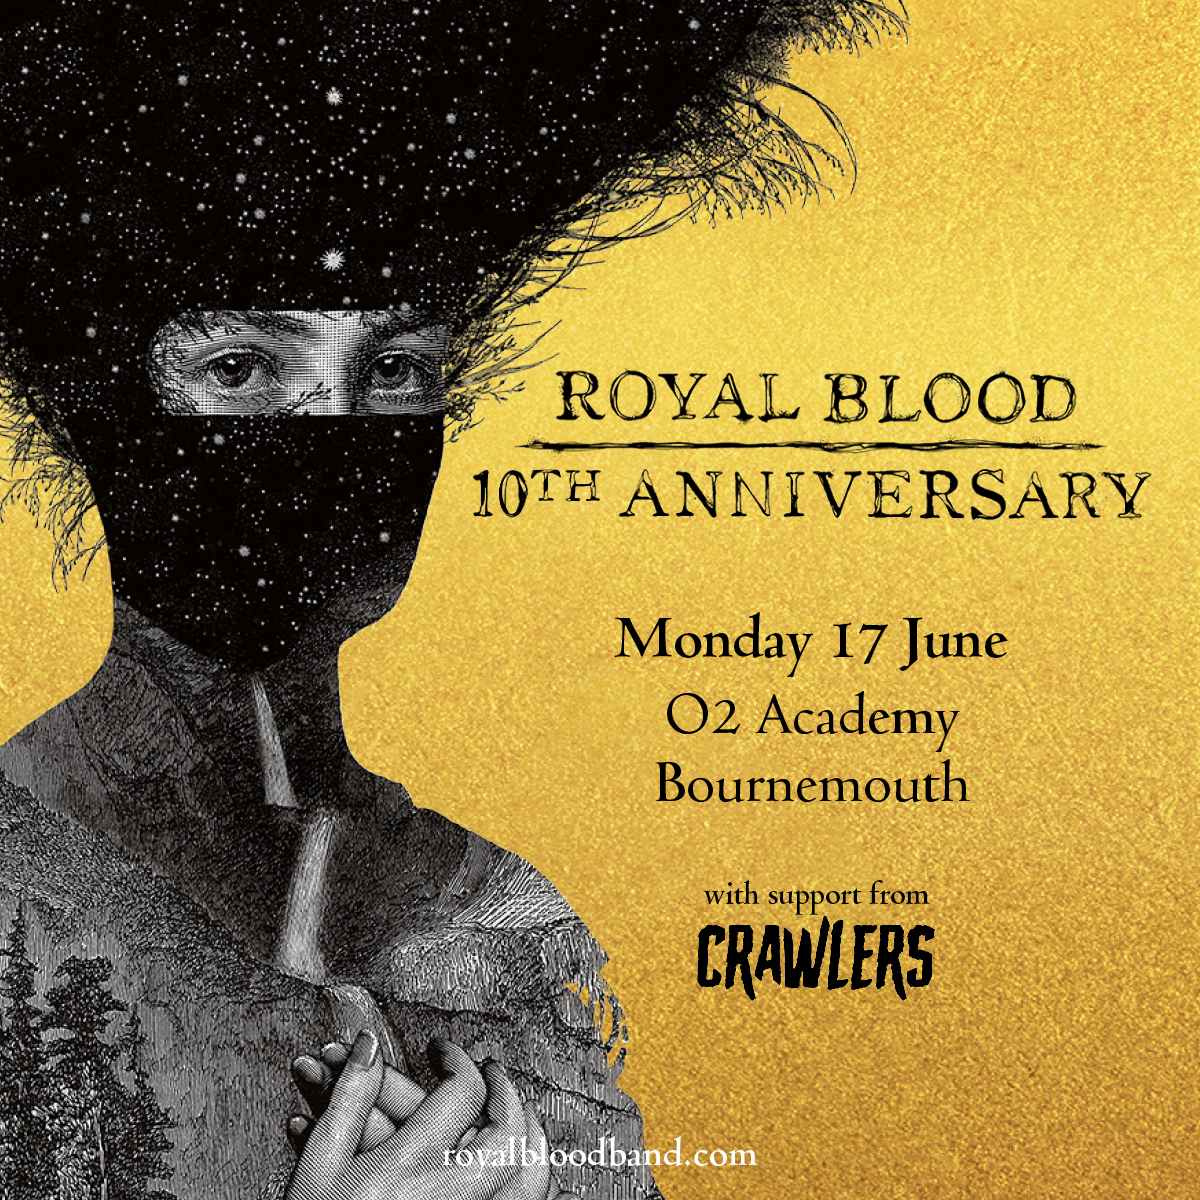 Bournemouth! Tickets for @royalblooduk warm up show are on sale now, with support from @CrawlersHQ ⚡️ Book now at tix.to/RB10